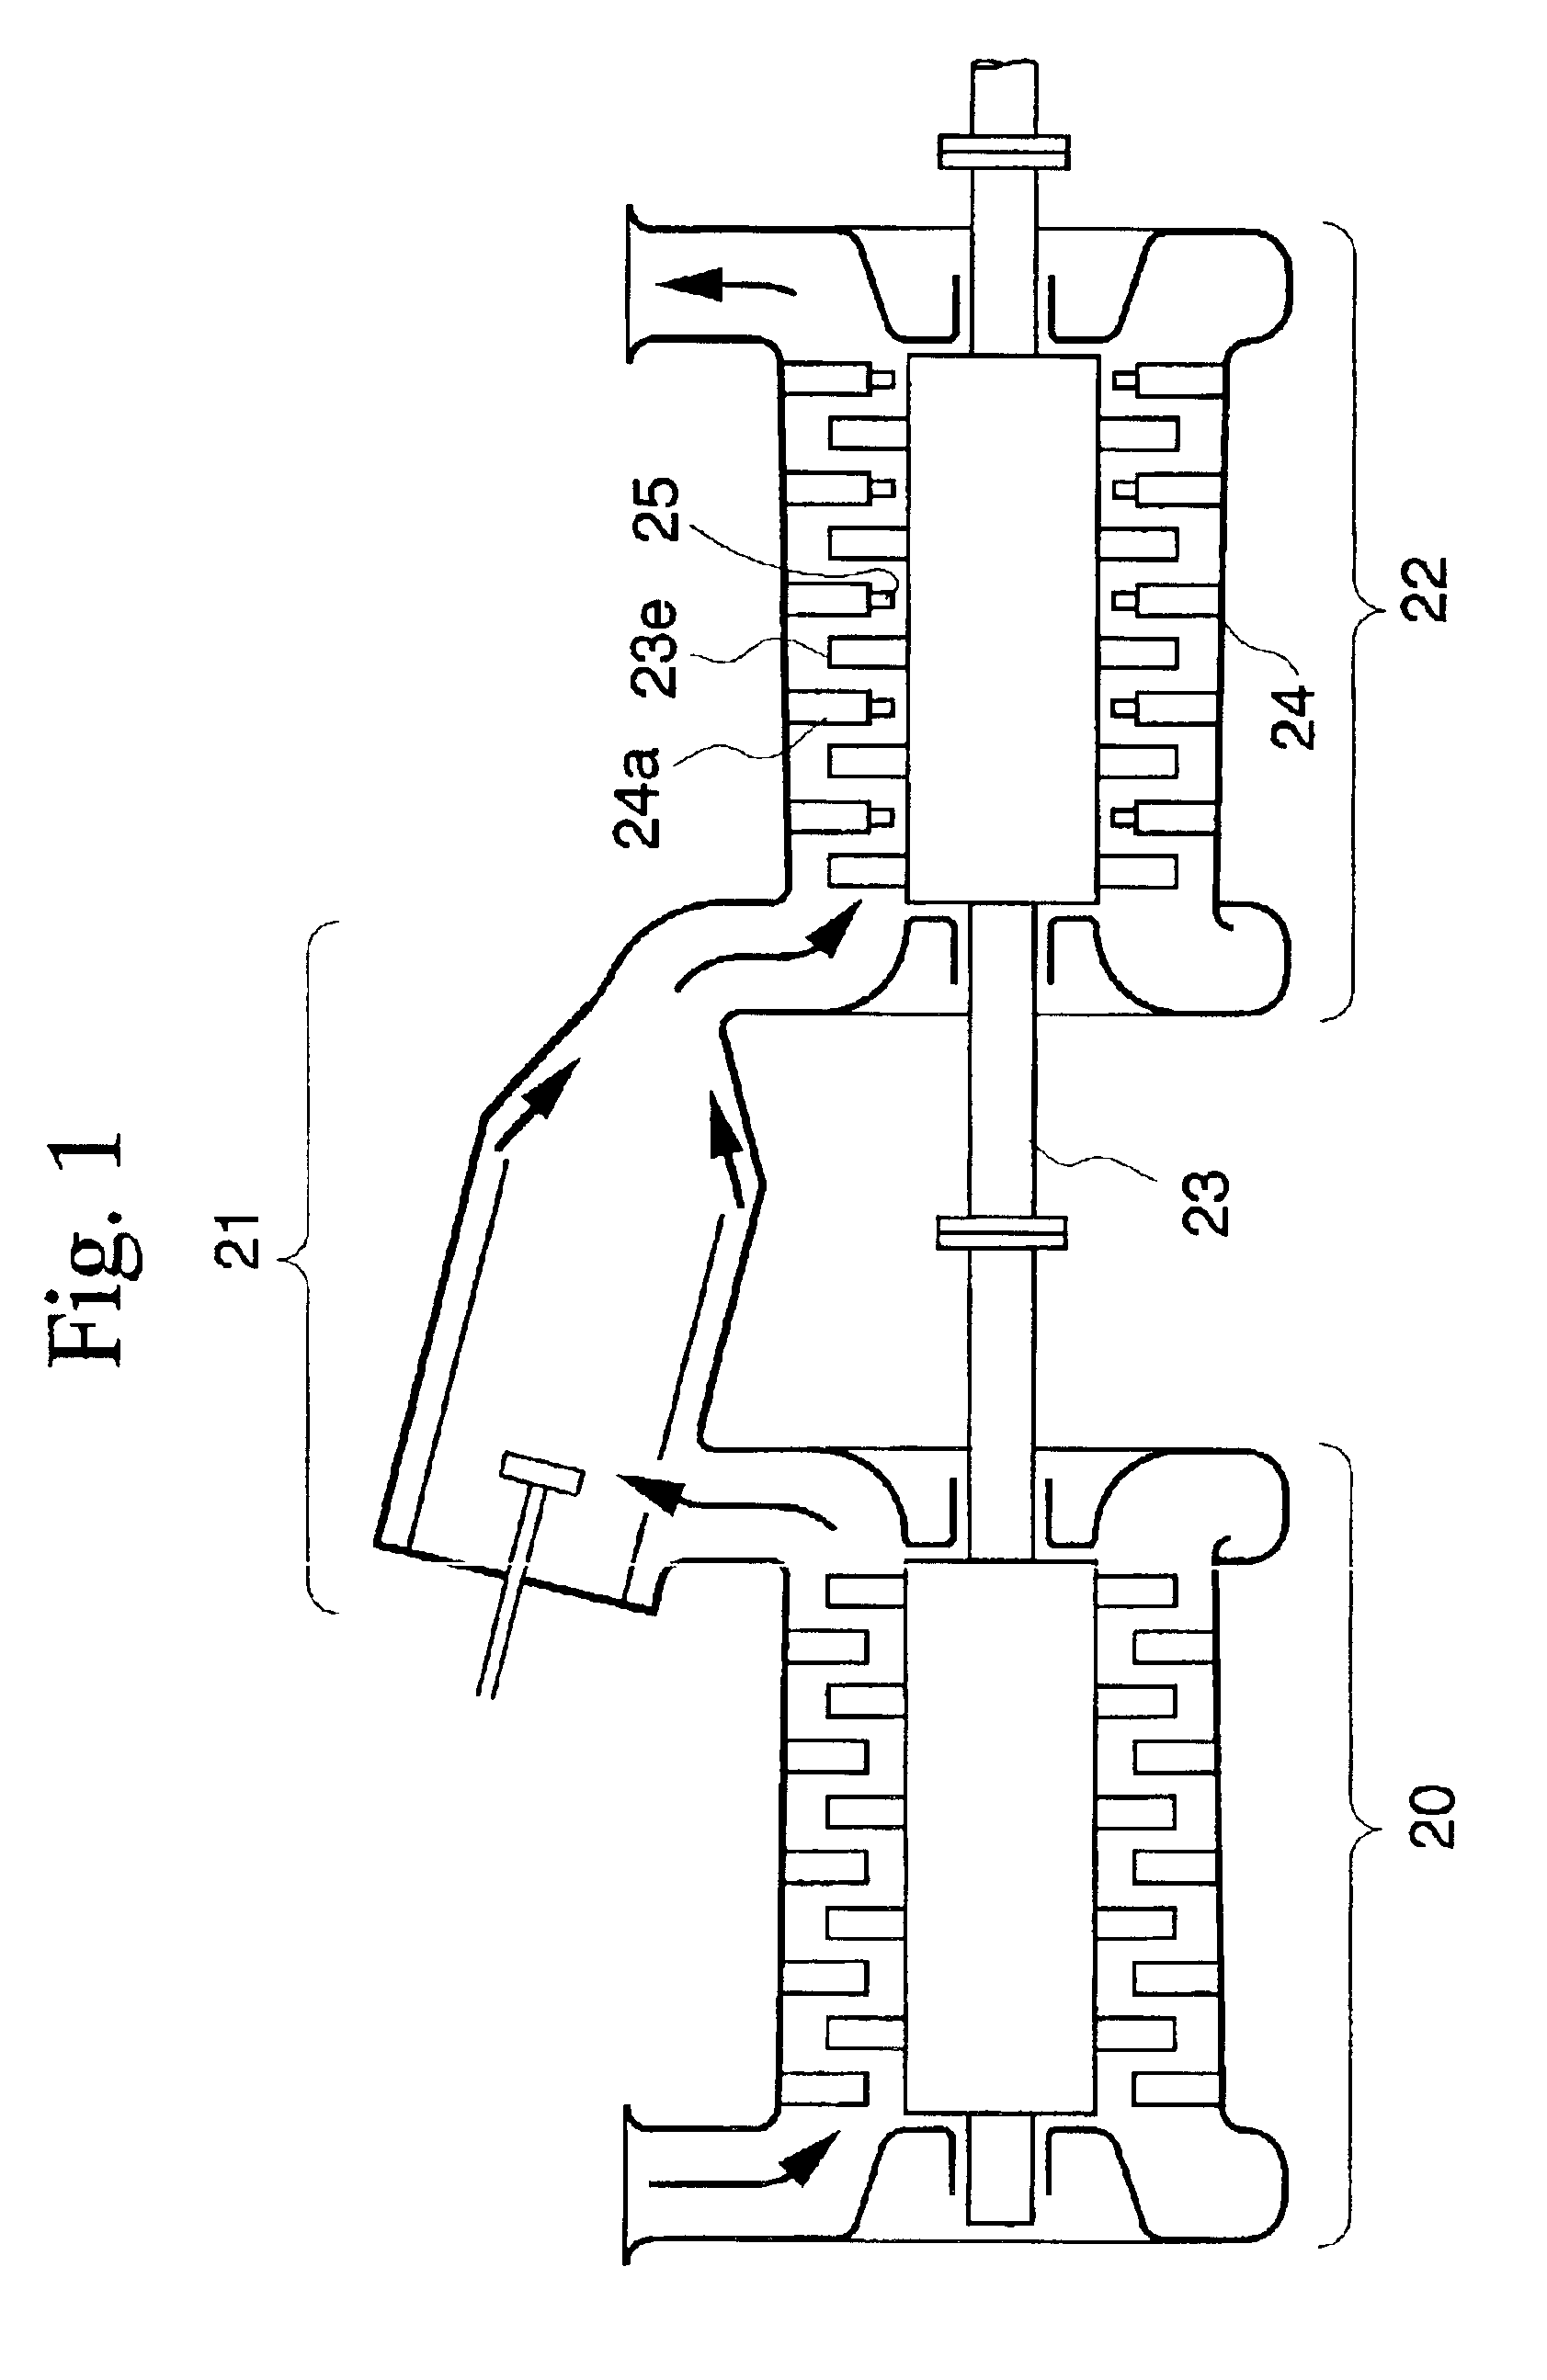 Shaft seal structure and turbine